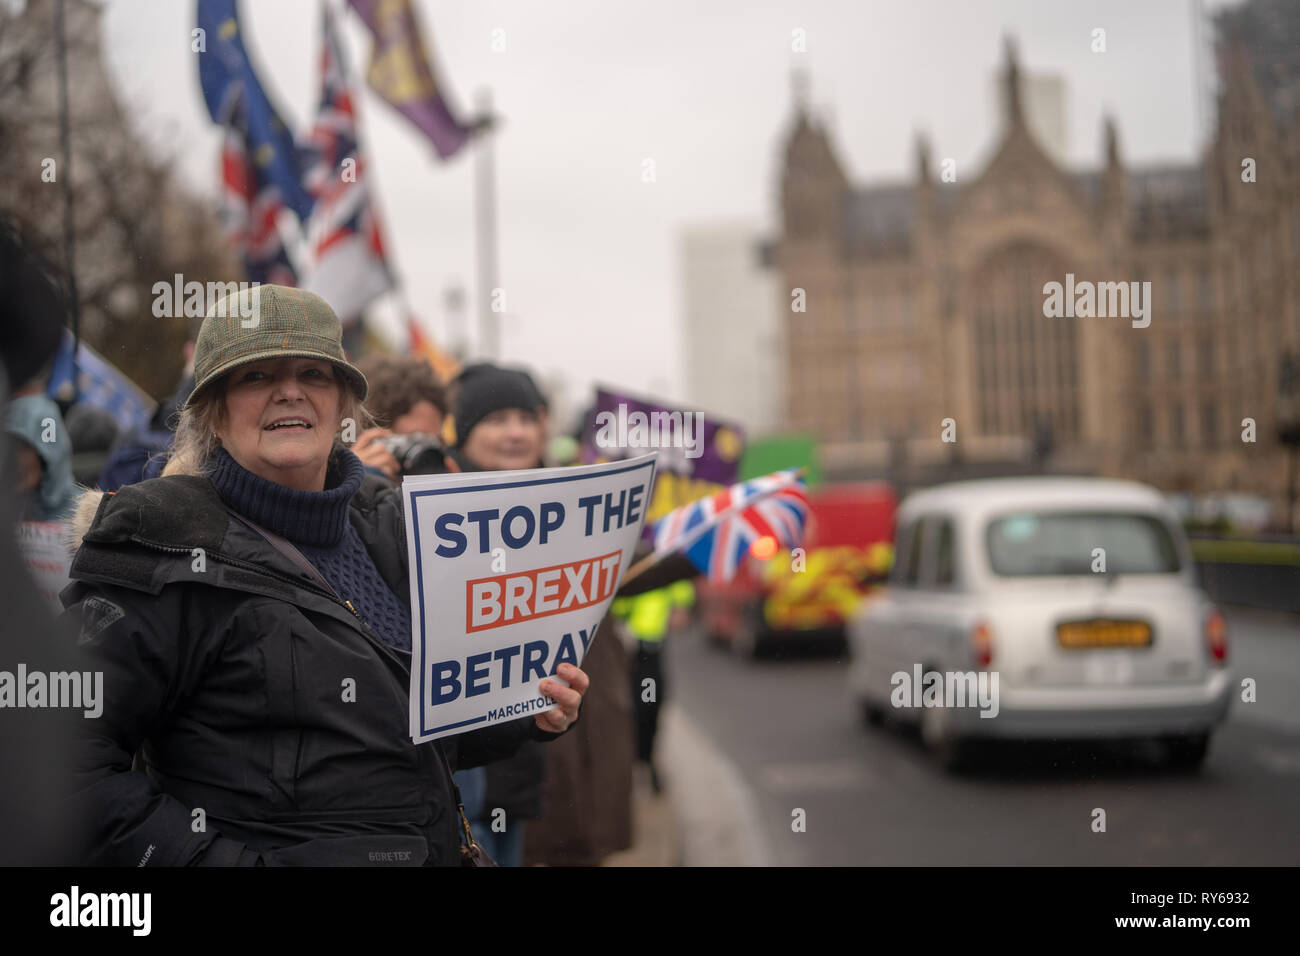 London, UK. 12th Mar, 2019. Protesters outside the UK Houses of Parliament in London ahead of the second so-called meaningful vote in House of Commons on Theresa May's revised EU Withdrawal (Brexit) Agreement. Photo date: Tuesday, March 12, 2019. Photo credit should read Credit: Roger Garfield/Alamy Live News Stock Photo